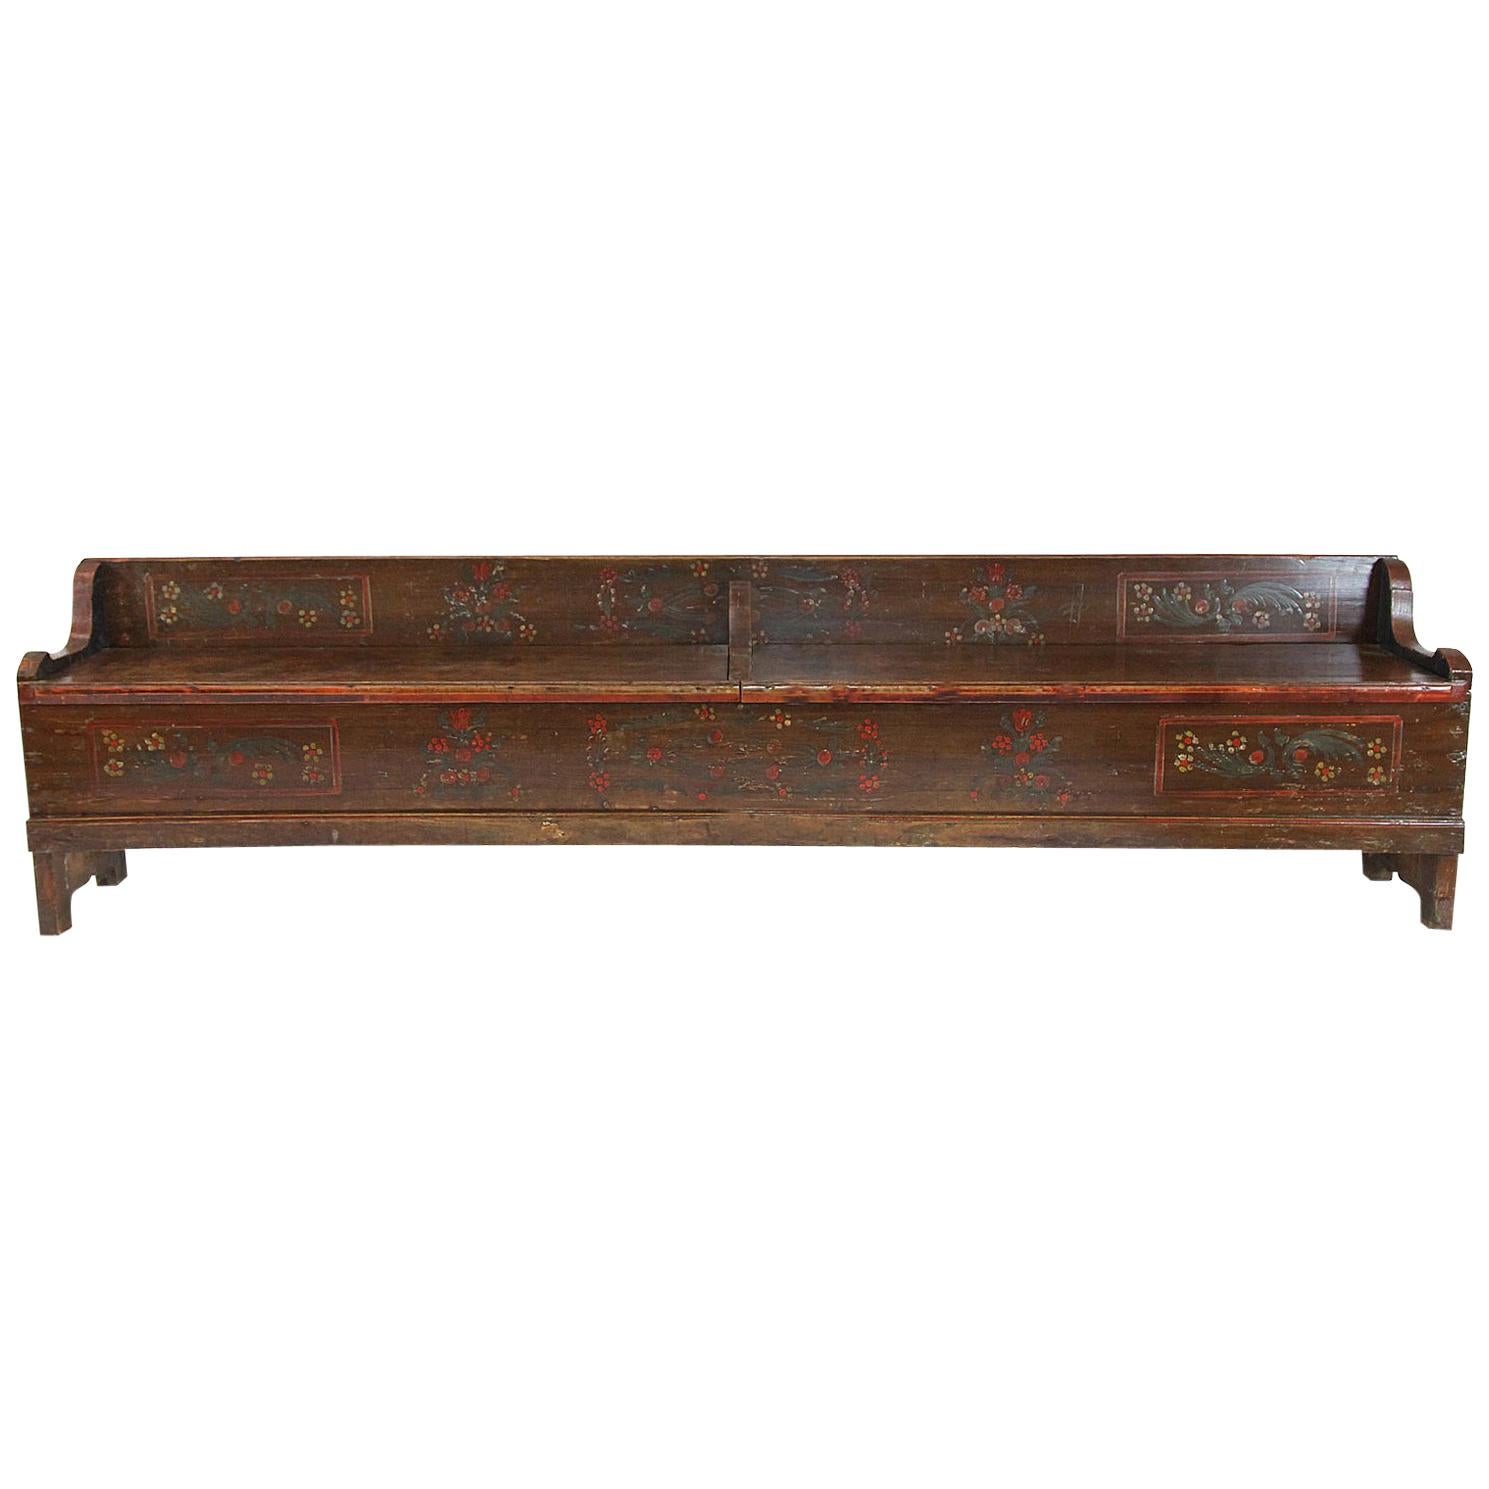 19th Century Long Painted Pine Lift Top Bench